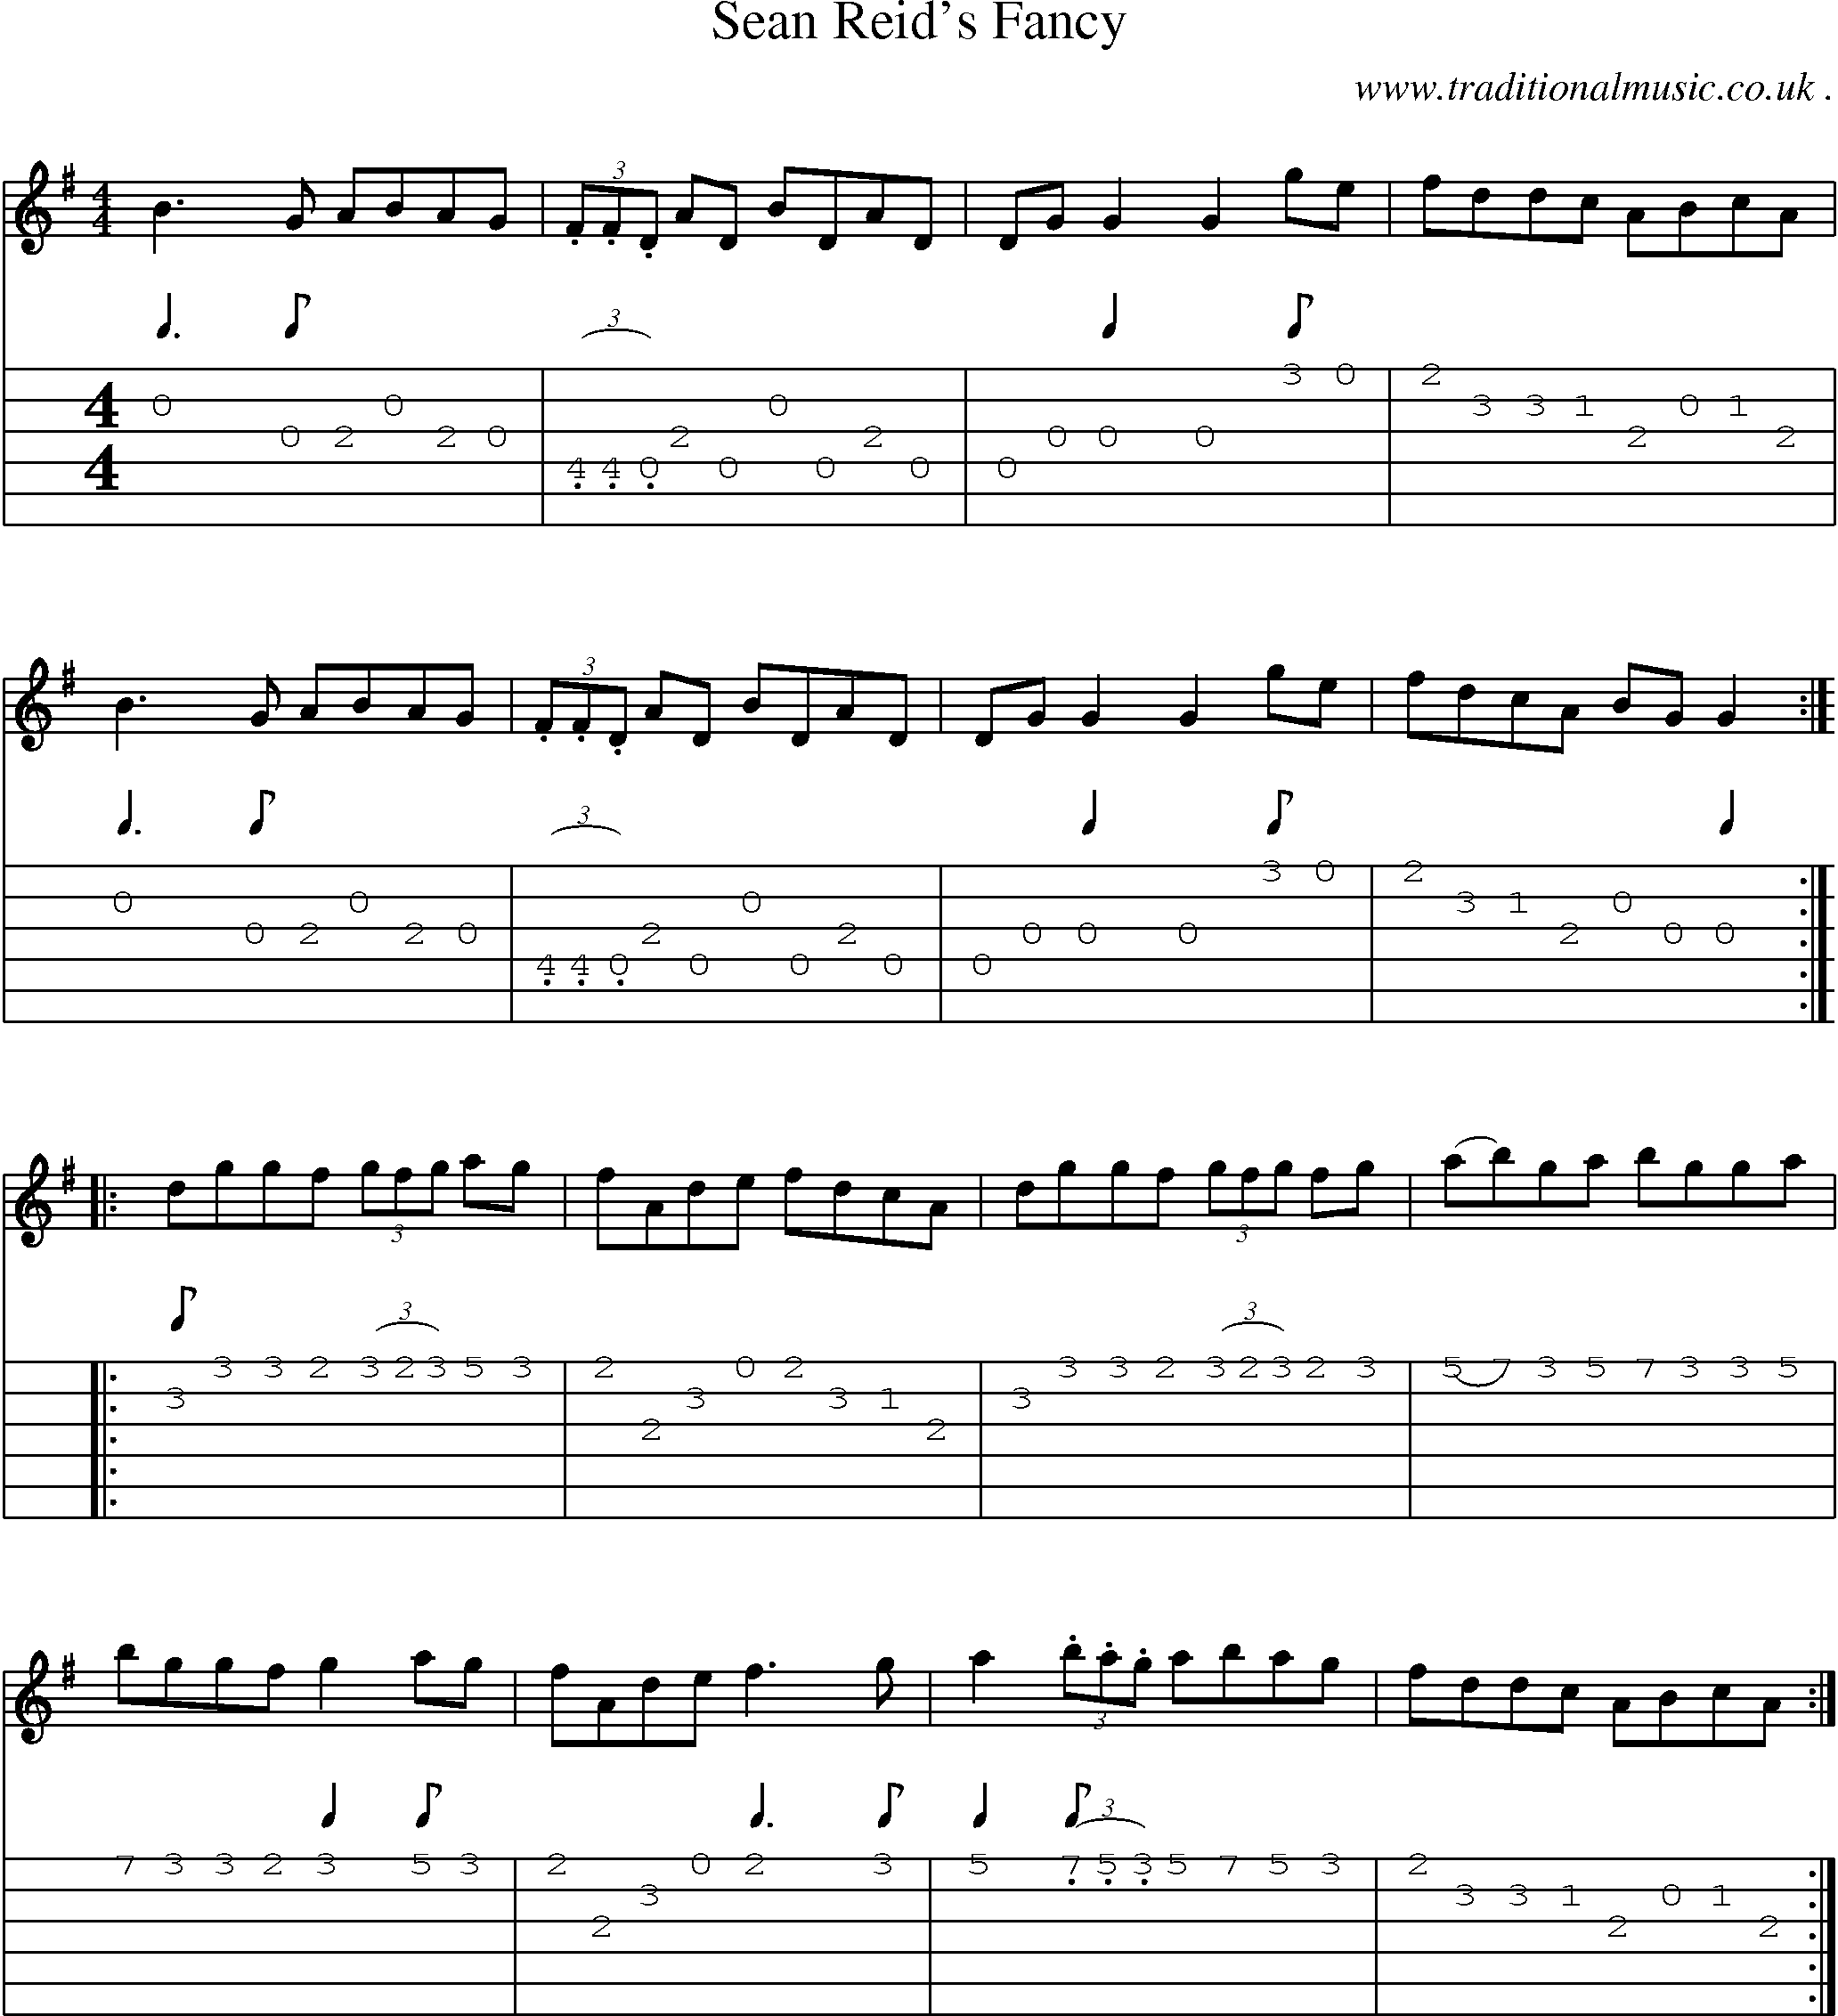 Sheet-Music and Guitar Tabs for Sean Reids Fancy